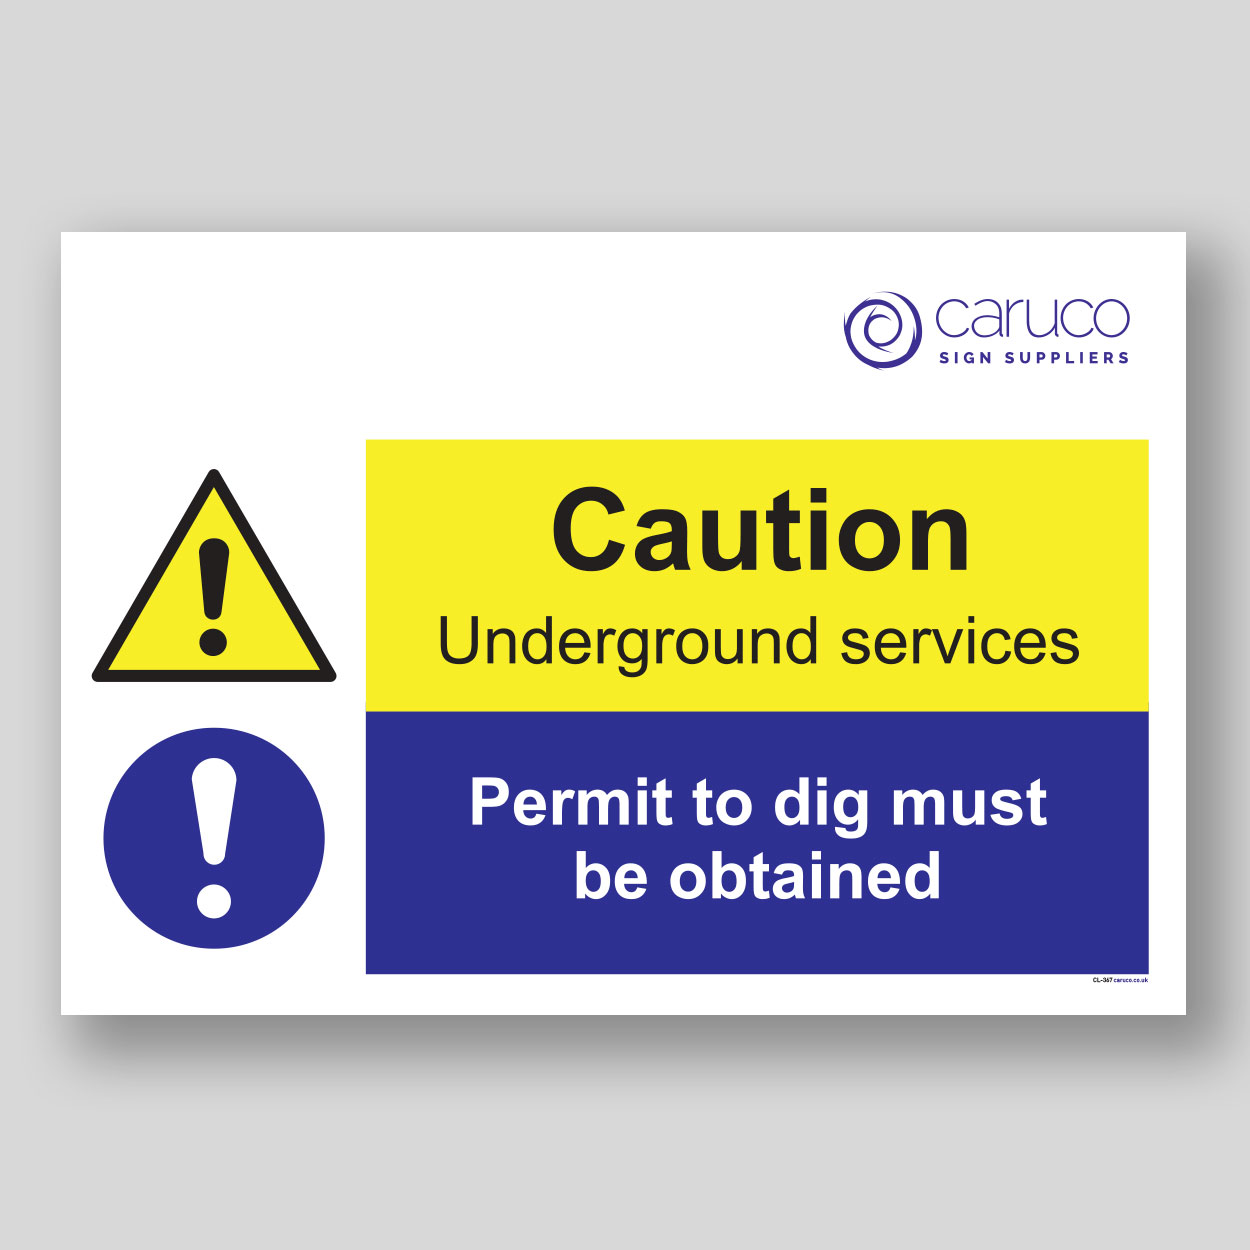 CL-367 Caution services - permit to dig